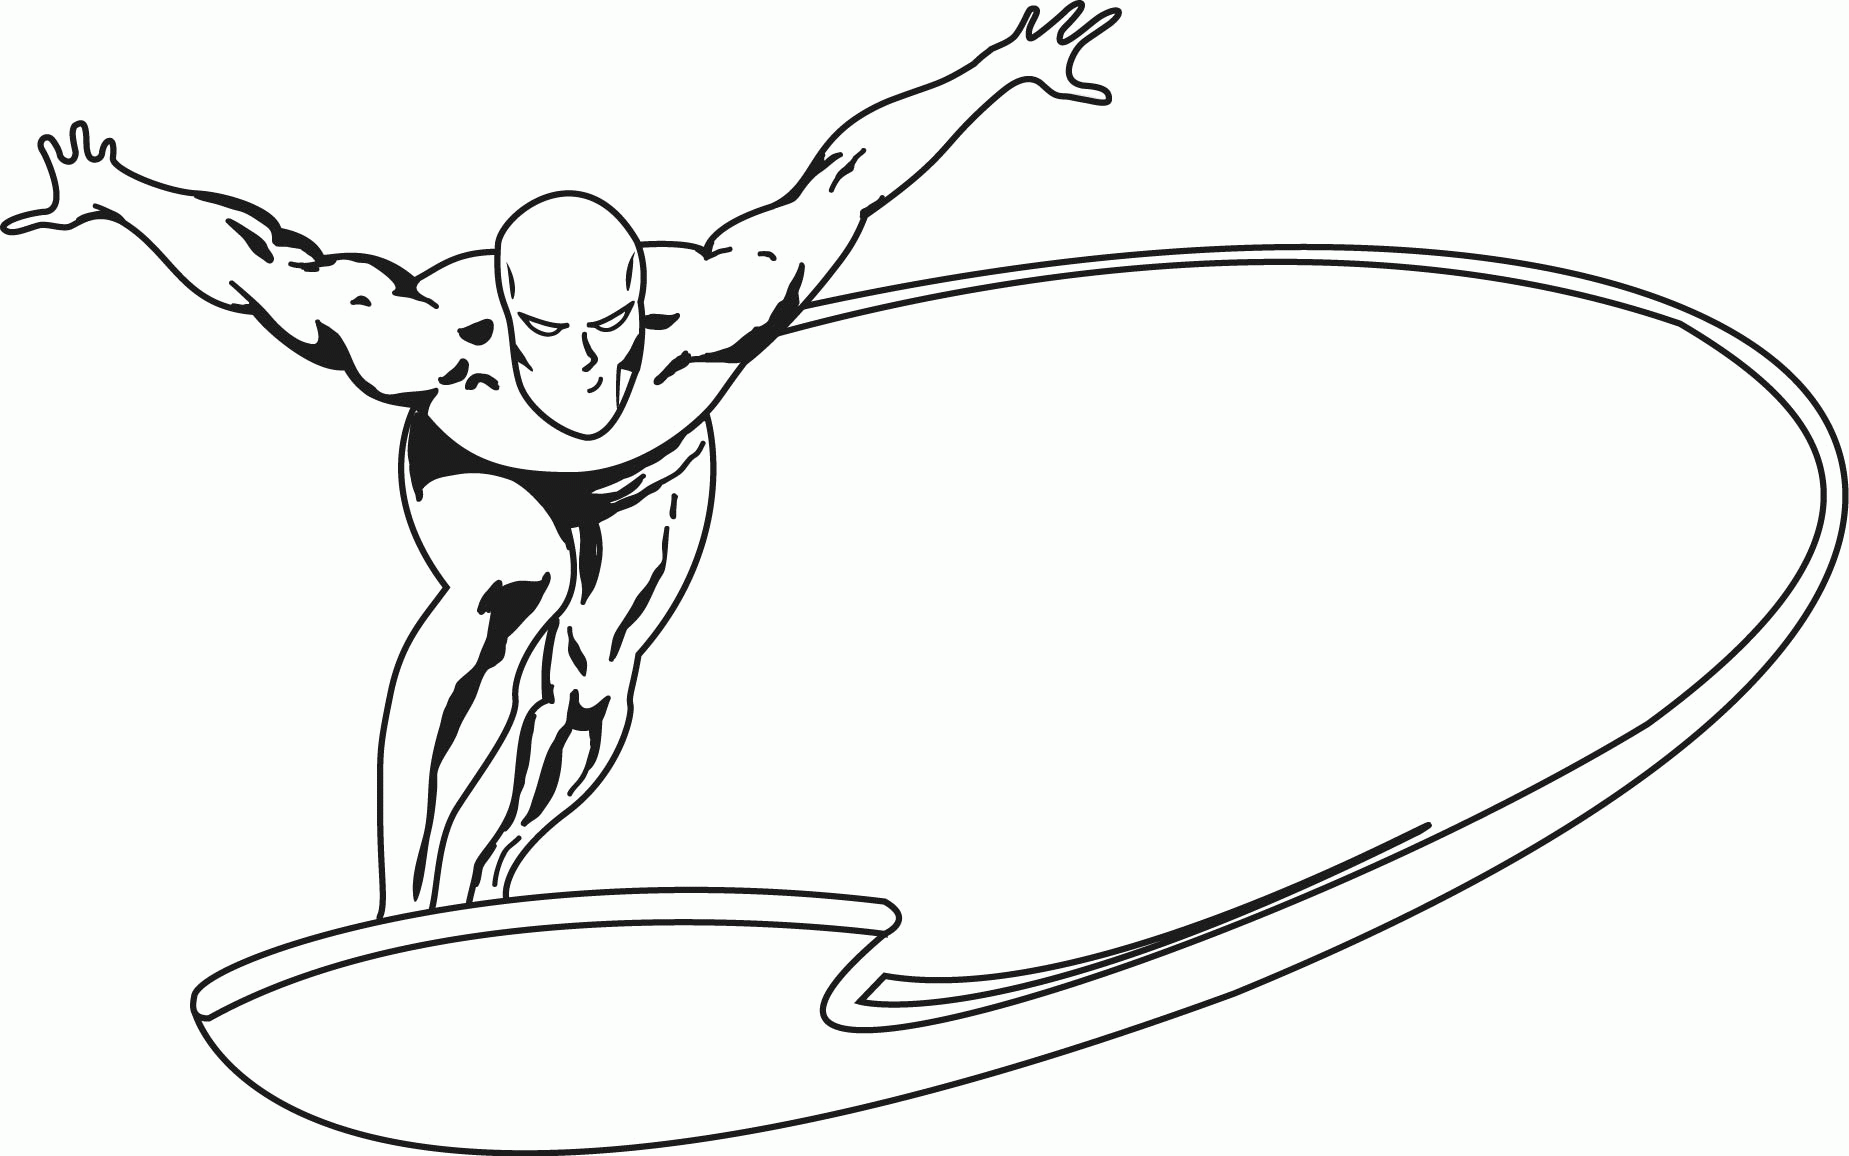 Free Silver Surfer Coloring Page | Wecoloringpage